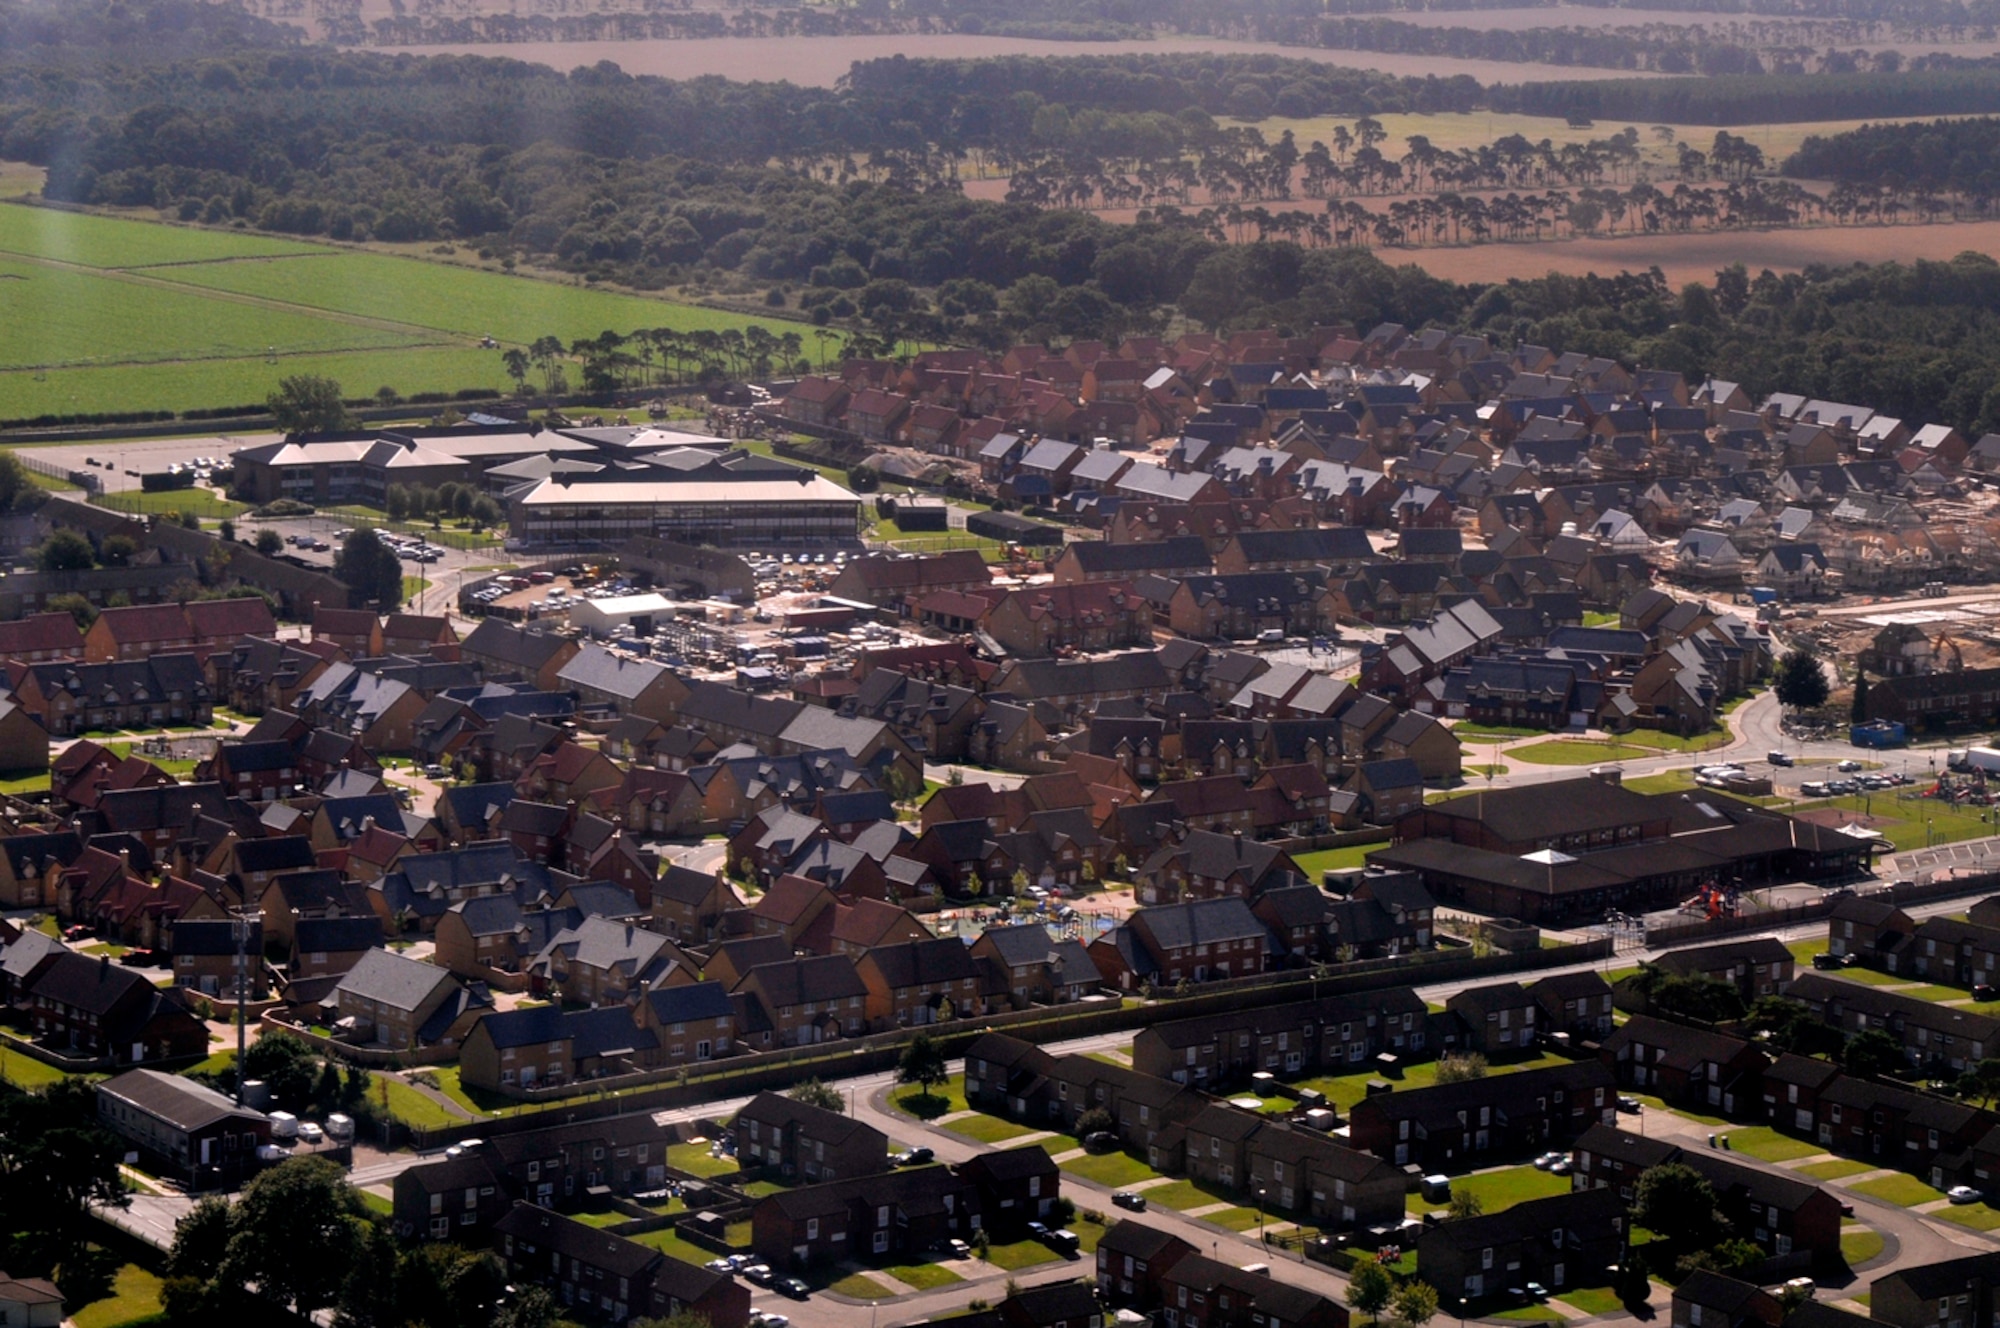 Liberty Village is the new base housing on RAF Lakenheath, England. Residents interested in base housing should contact the housing office. (U.S. Air Force photo by Airman 1st Class Perry Aston)